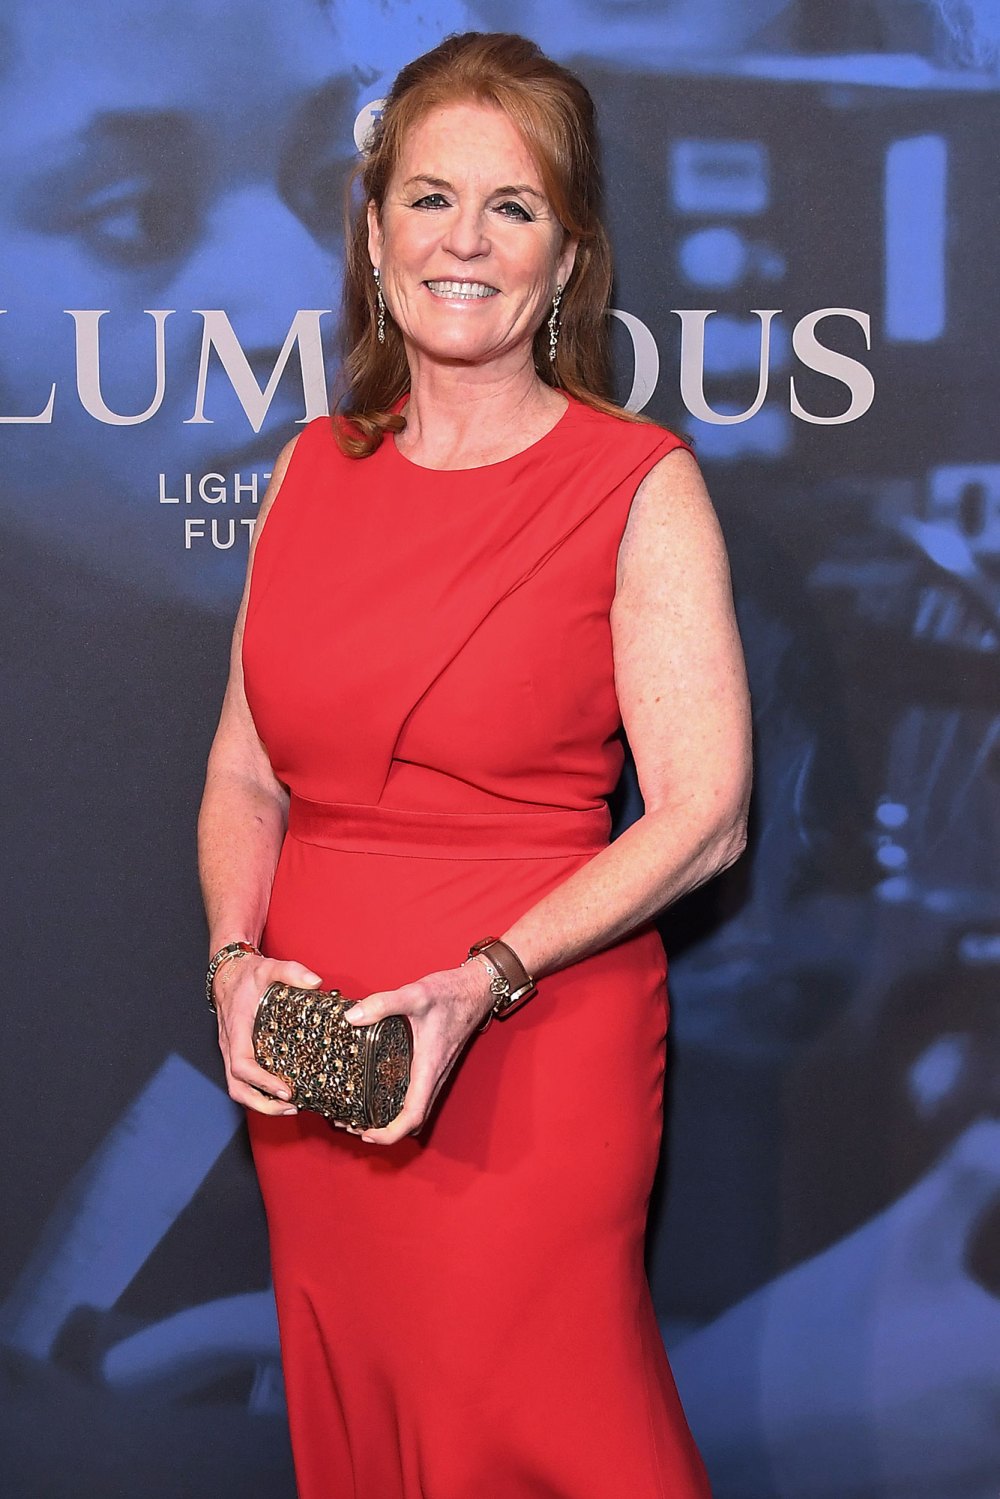 Sarah Ferguson Reacts to Her Wedding Being Featured in 'The Crown'